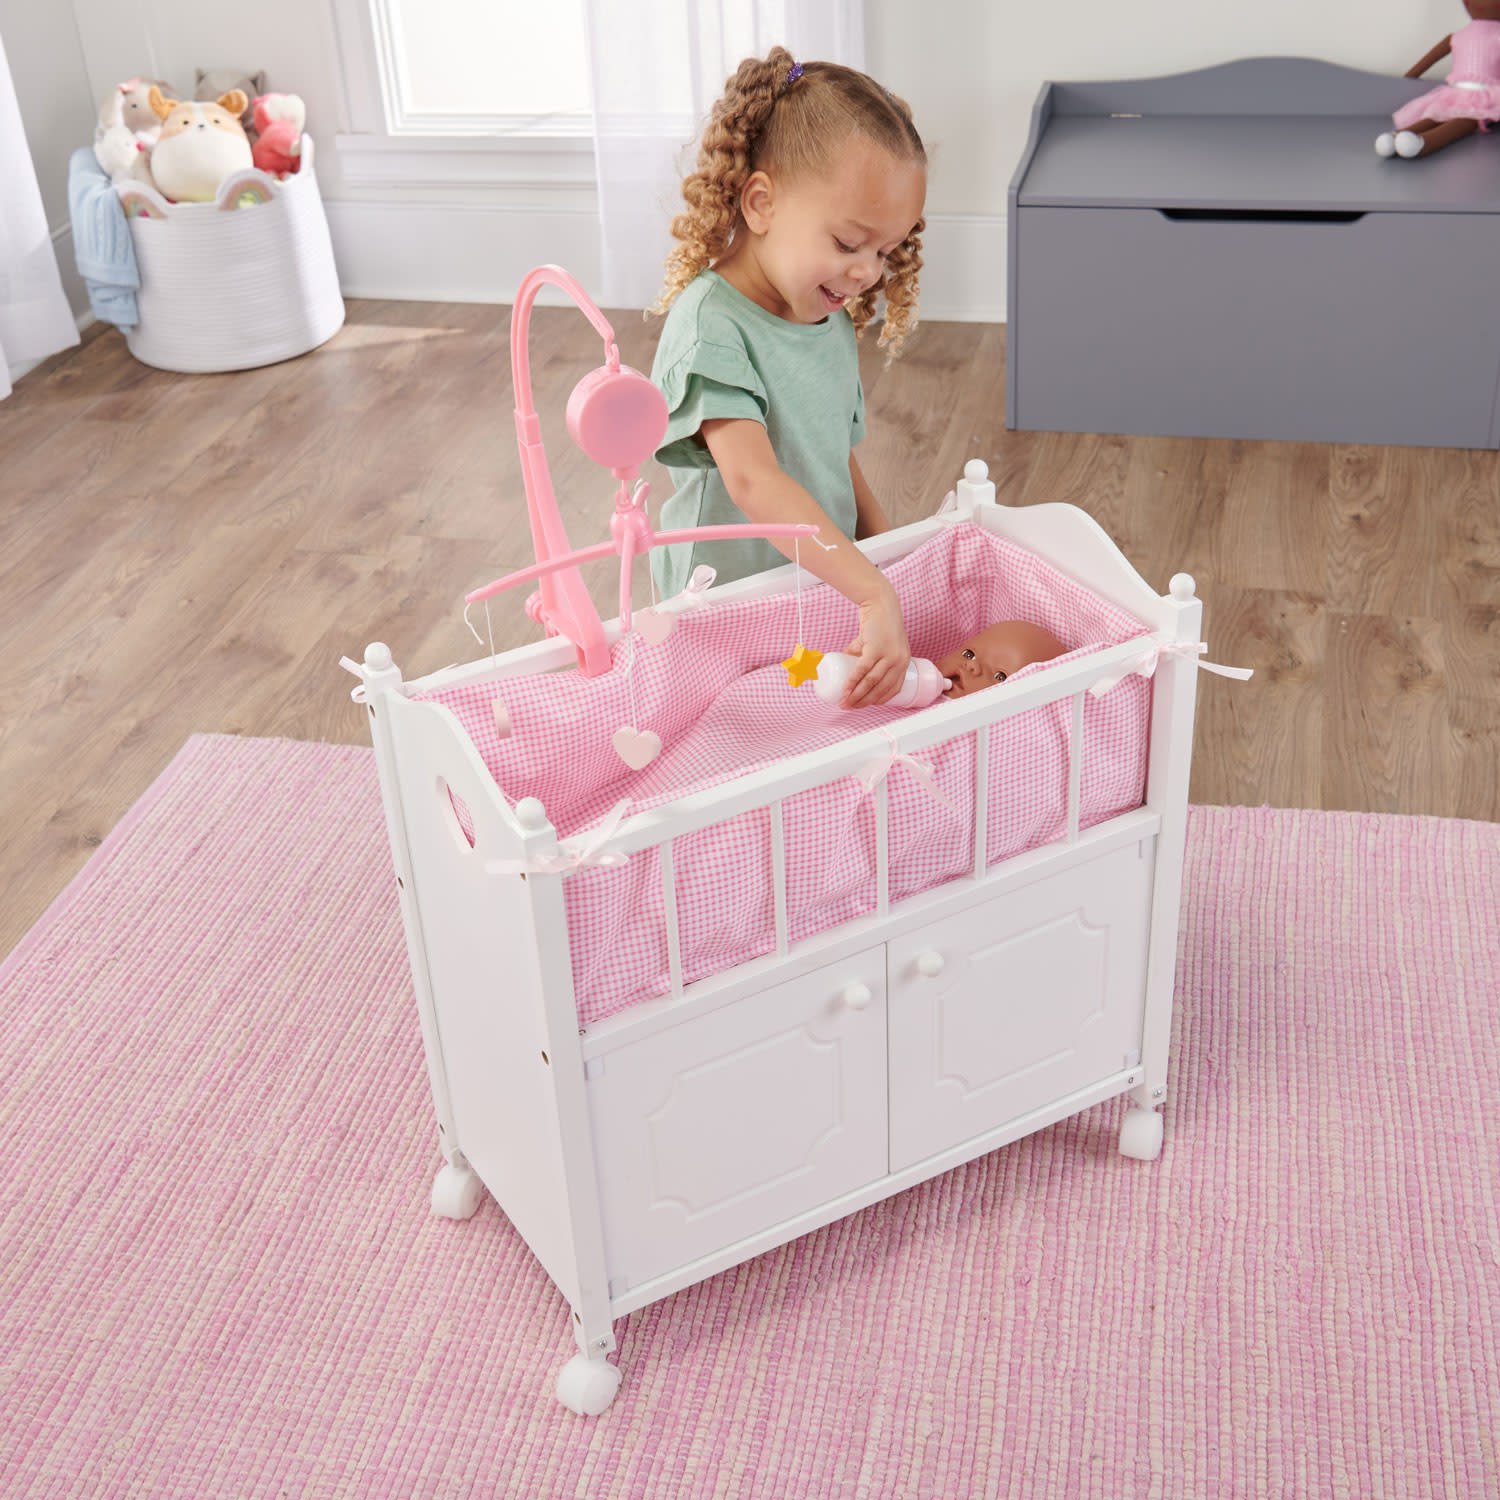 Badger Basket Cabinet Doll Crib with Gingham Bedding and Free Personalization Kit - White/Pink - image 3 of 13